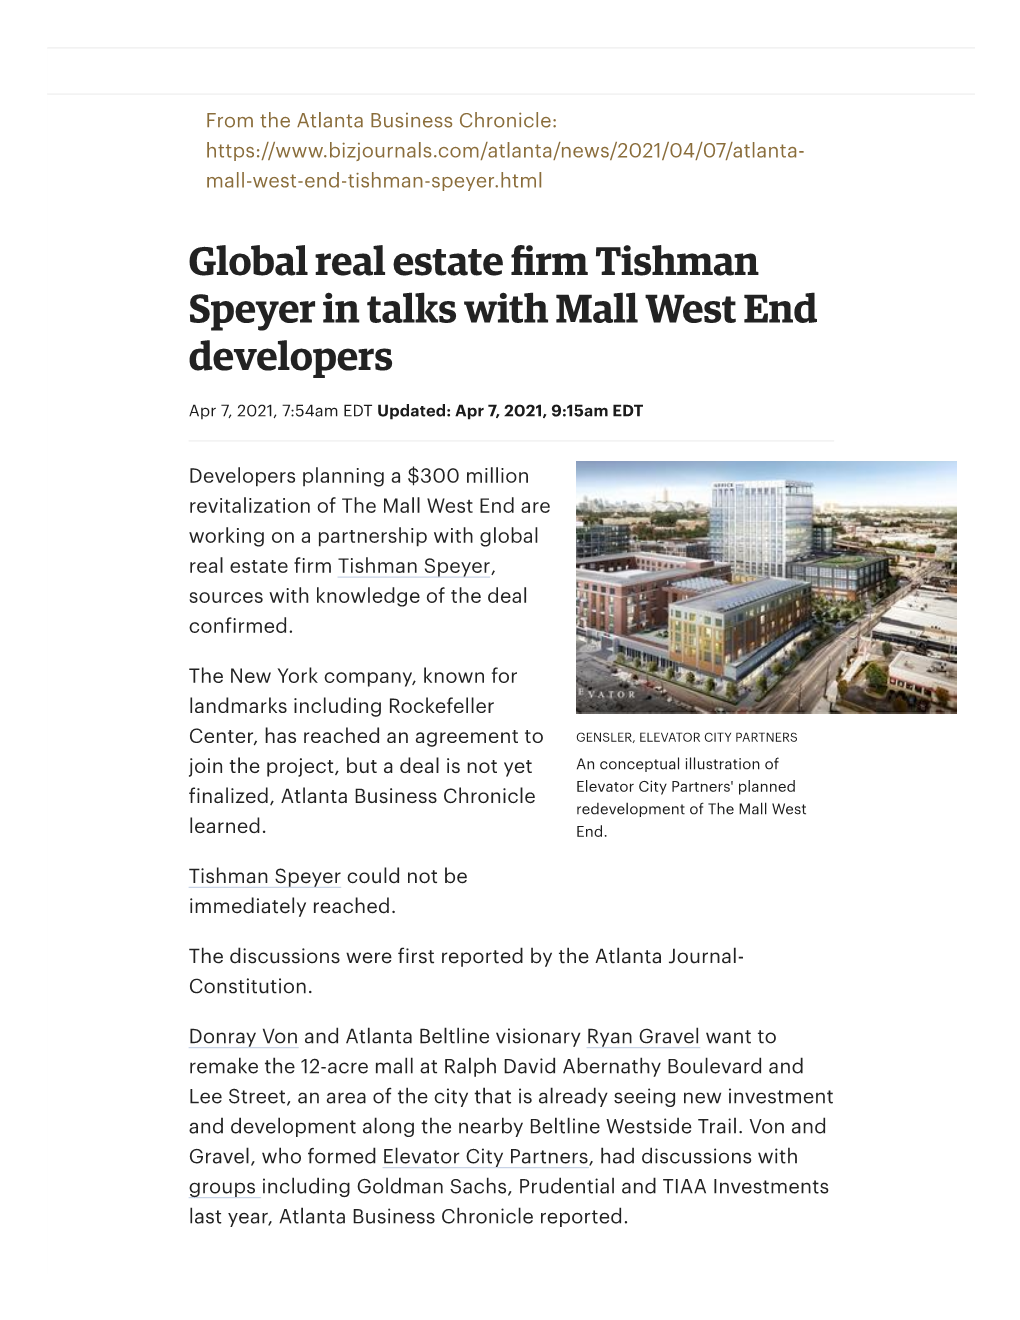 Global Real Estate Firm Tishman Speyer in Talks with Mall West End